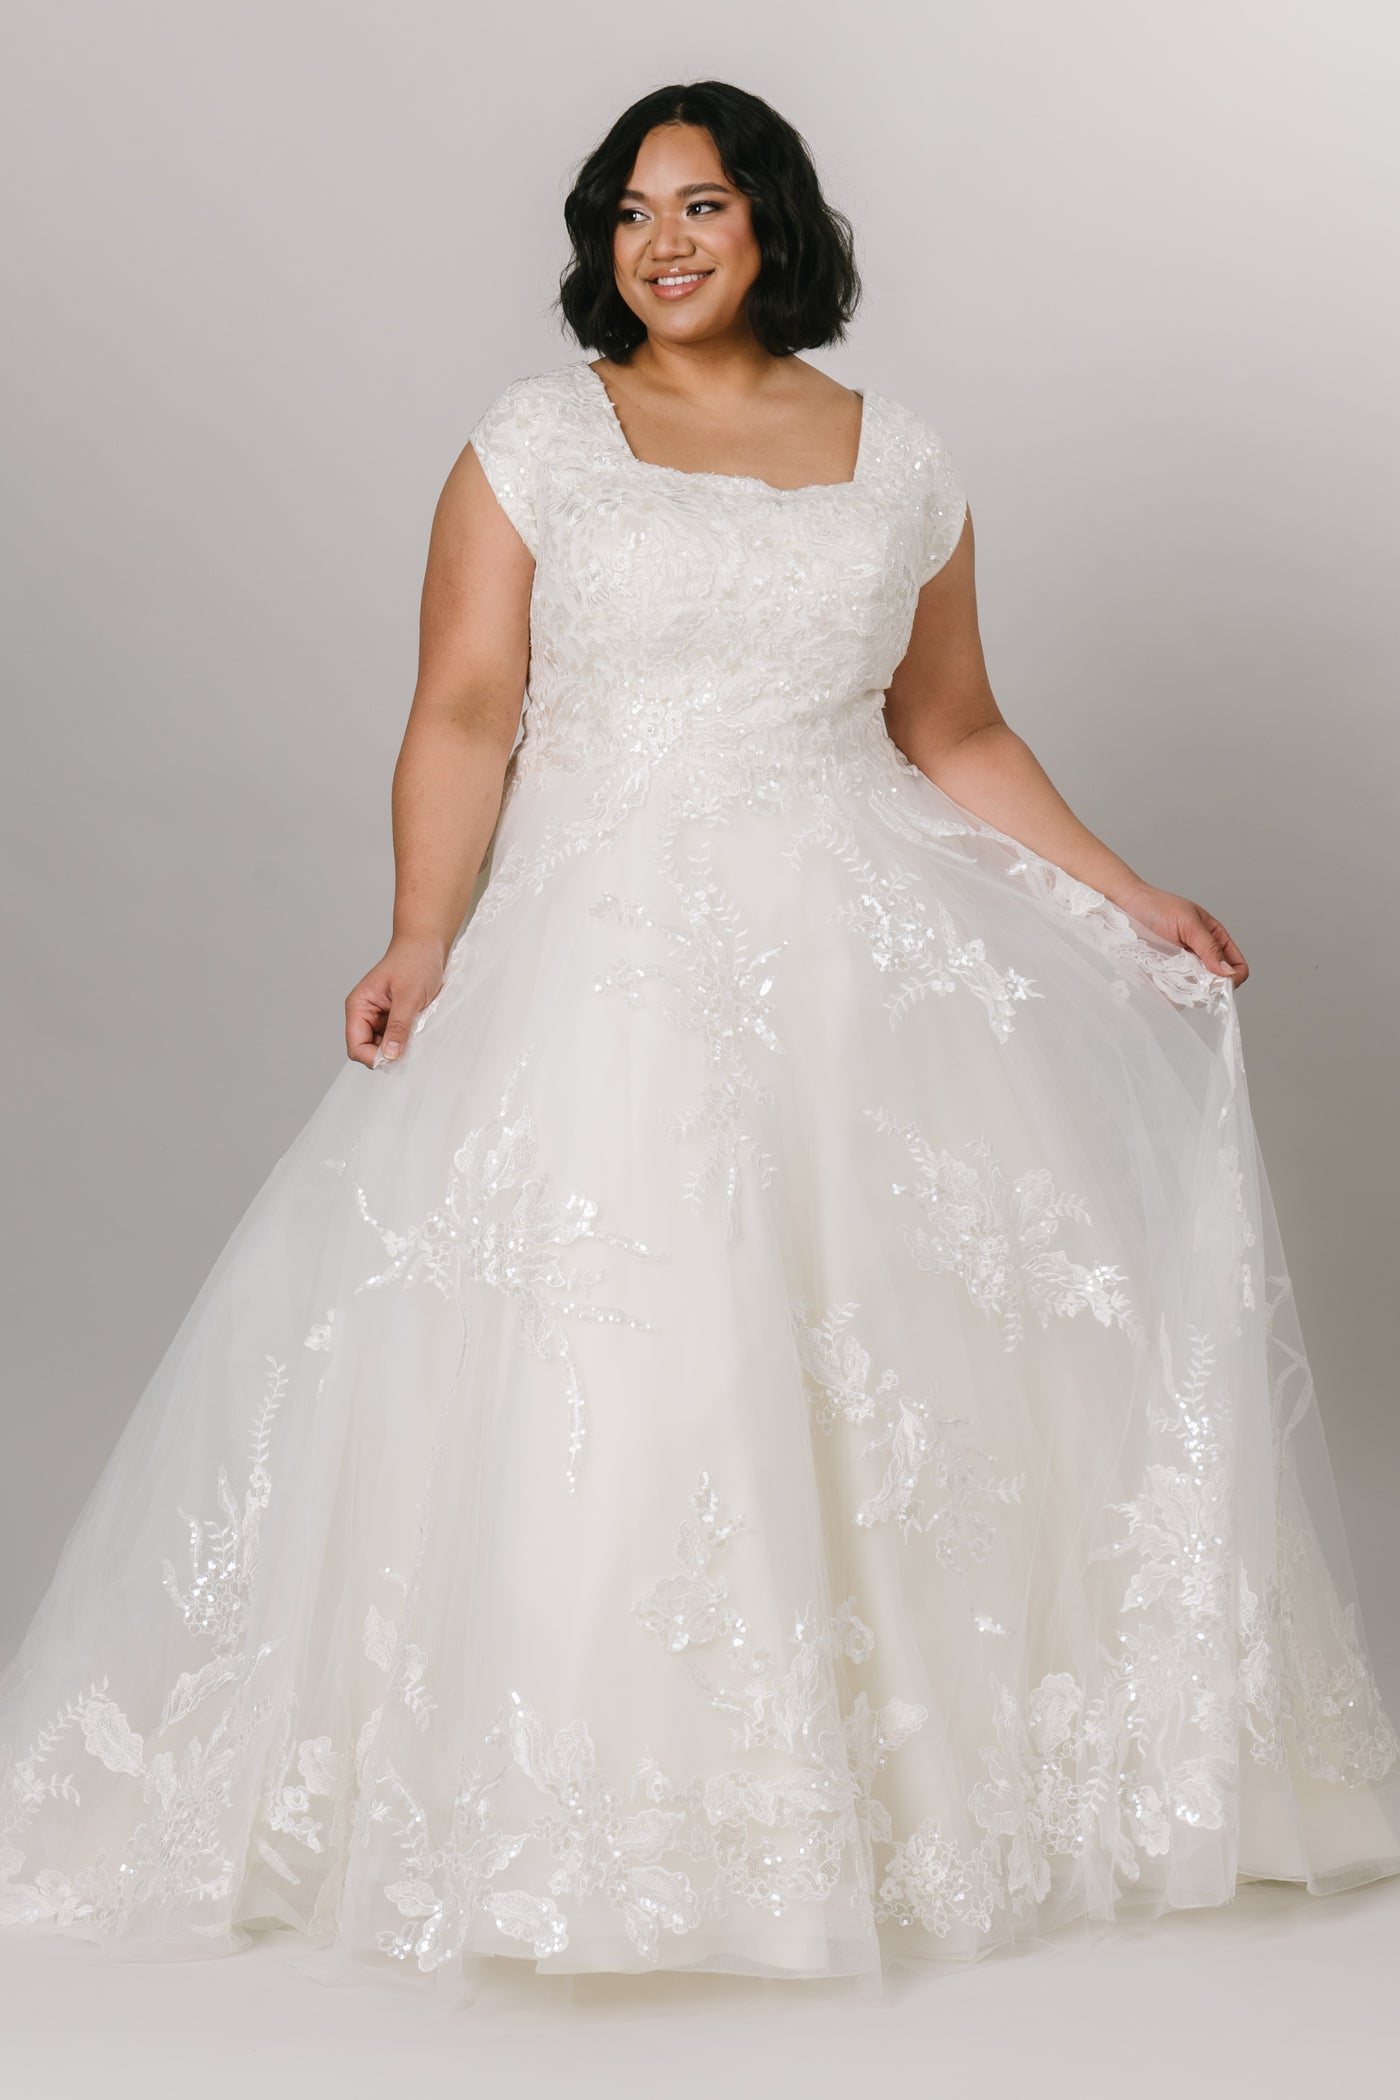 Plus size. Front view of modest wedding dress featuring a beautiful square neckline and ballgown silhouette.